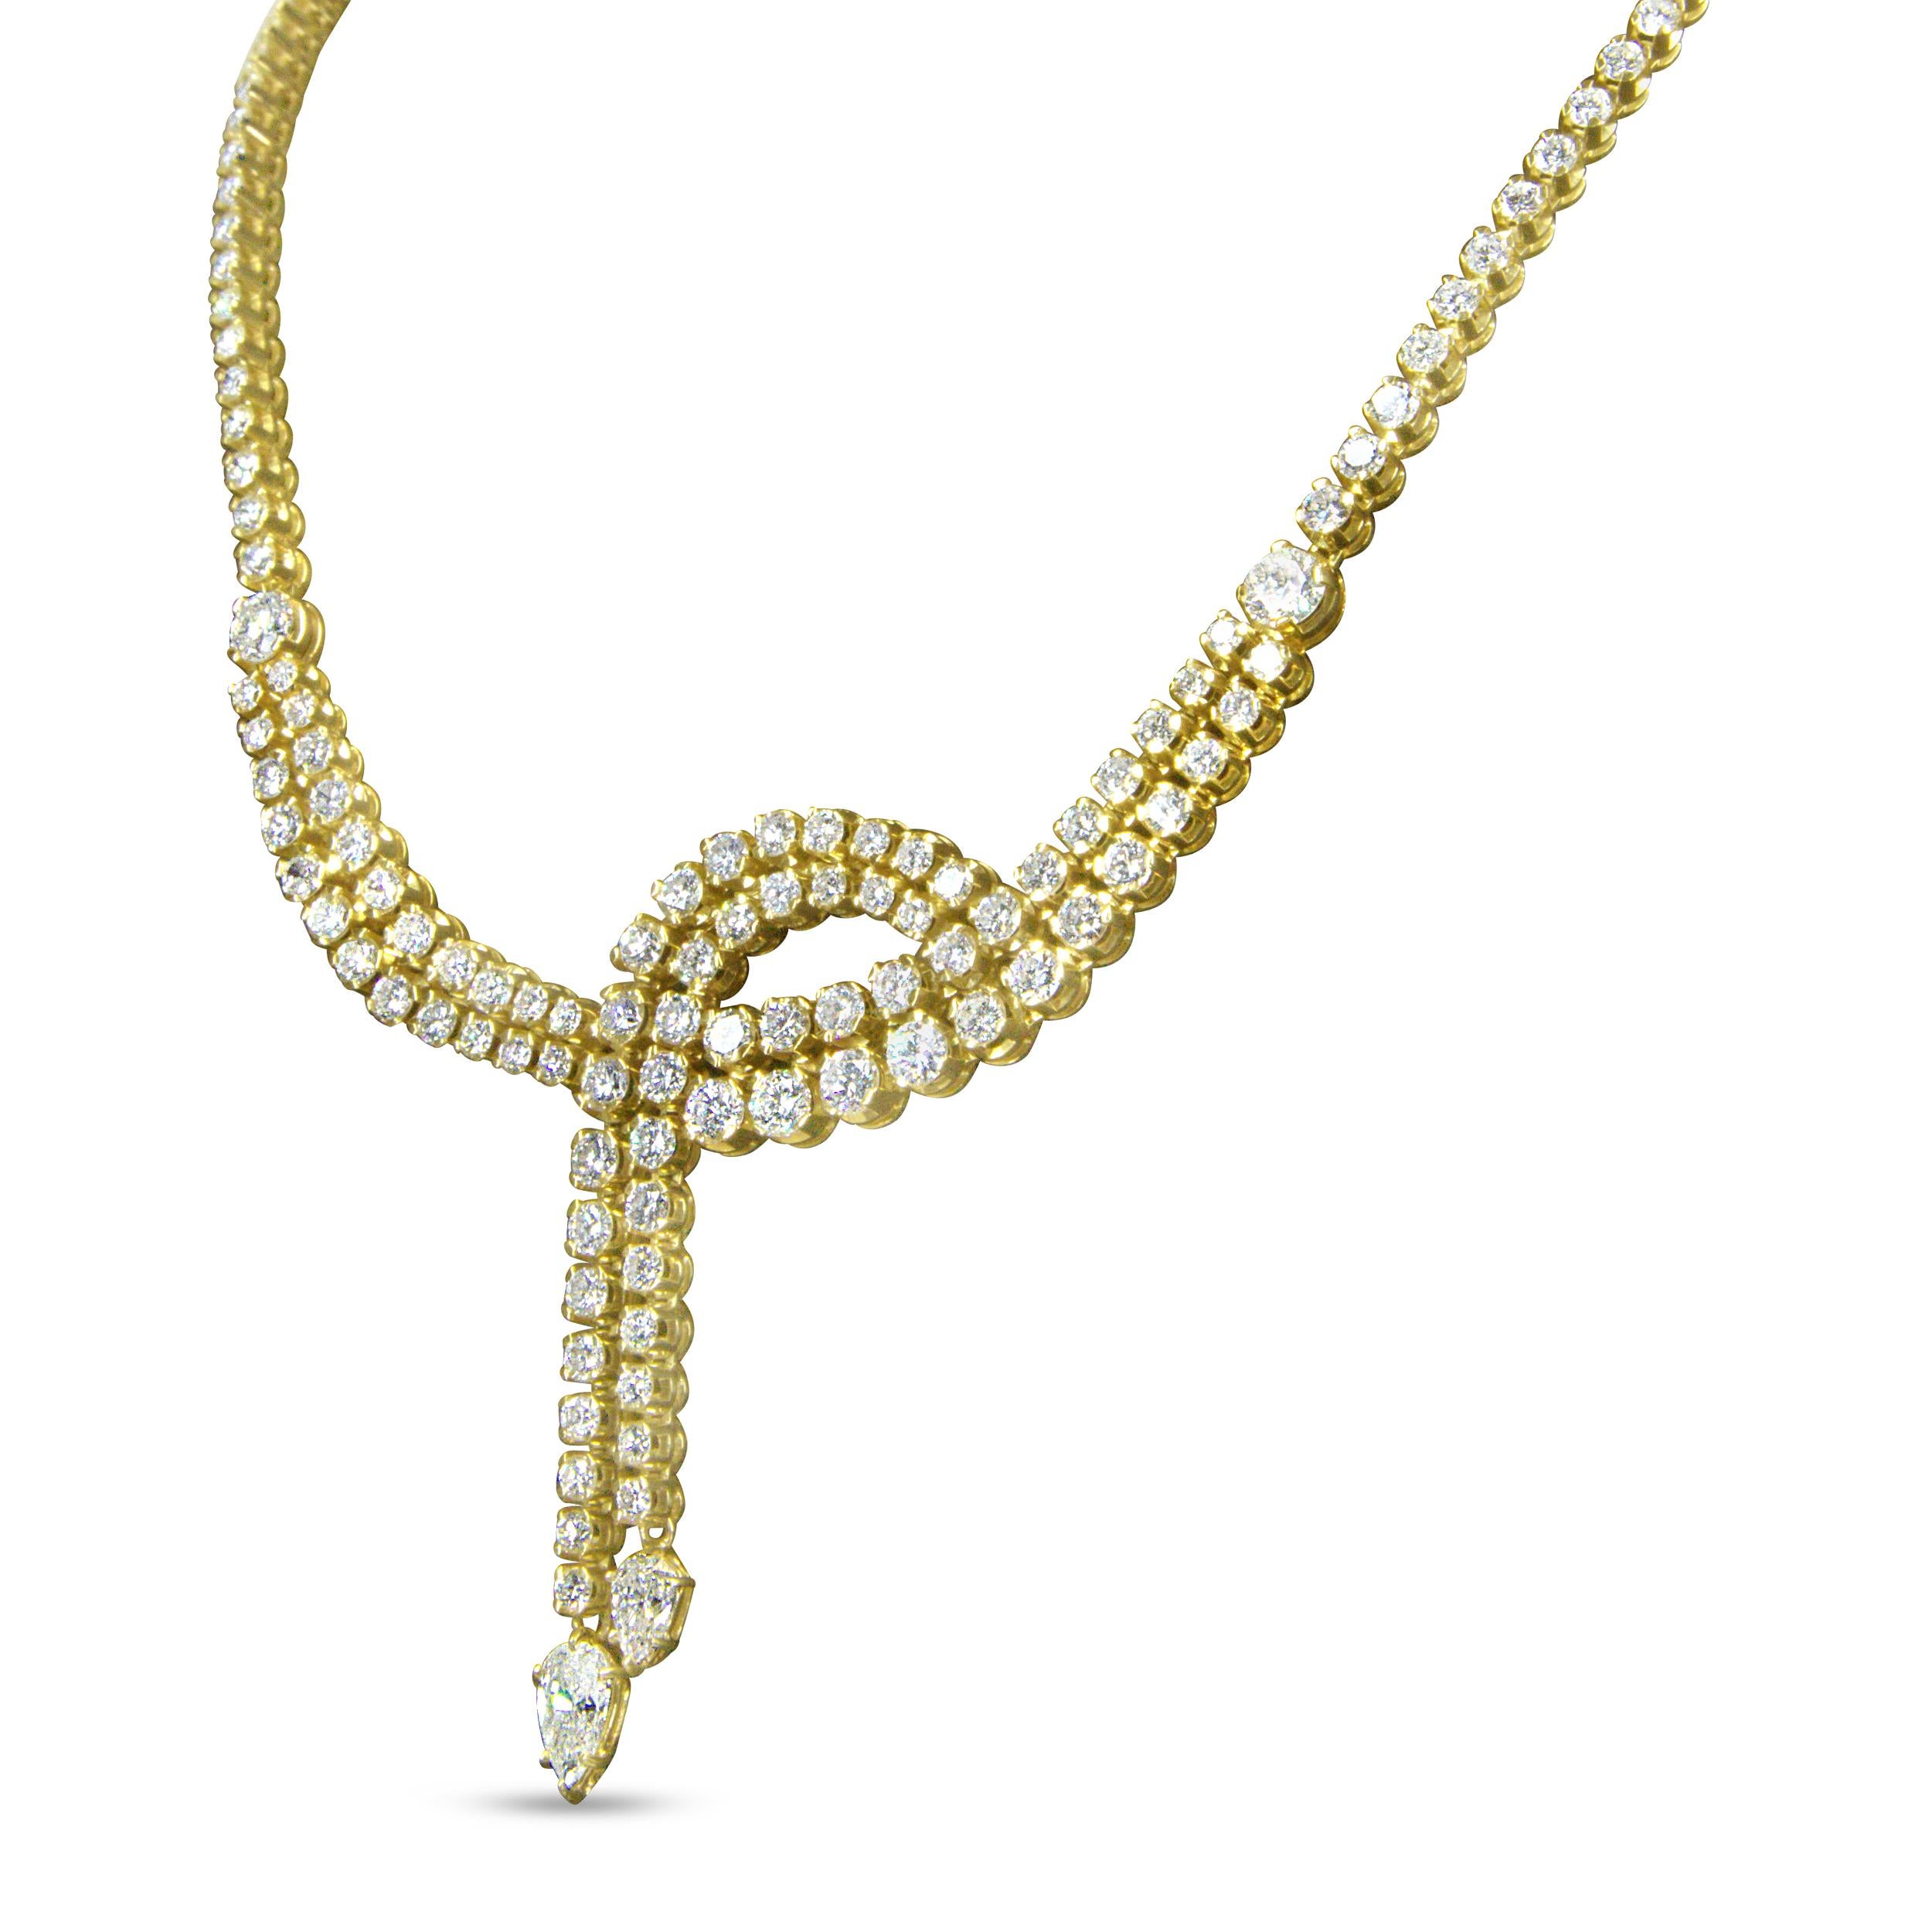 Adorn your neckline in radiant rows of luxurious natural diamonds! This lariat tennis necklace is an absolutely evocative design, enduringly elegant and boasting brilliant sparkle with over 200 diamonds that glitter and shimmer with your every move.